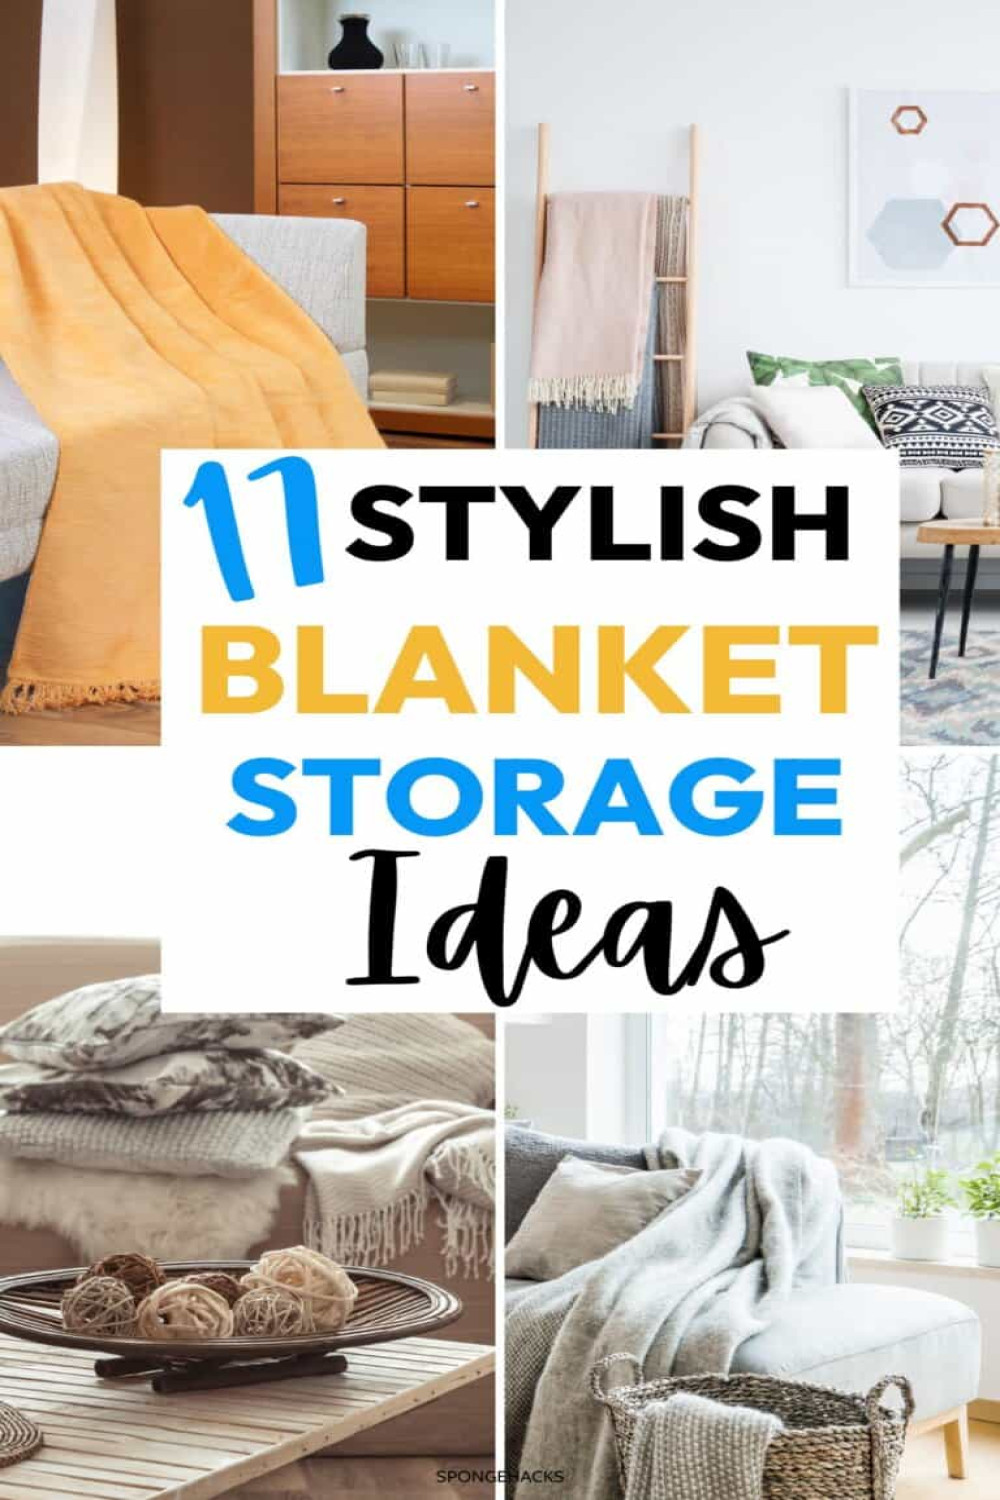 Genius Blanket Storage Ideas (How to Store Blankets In a Small